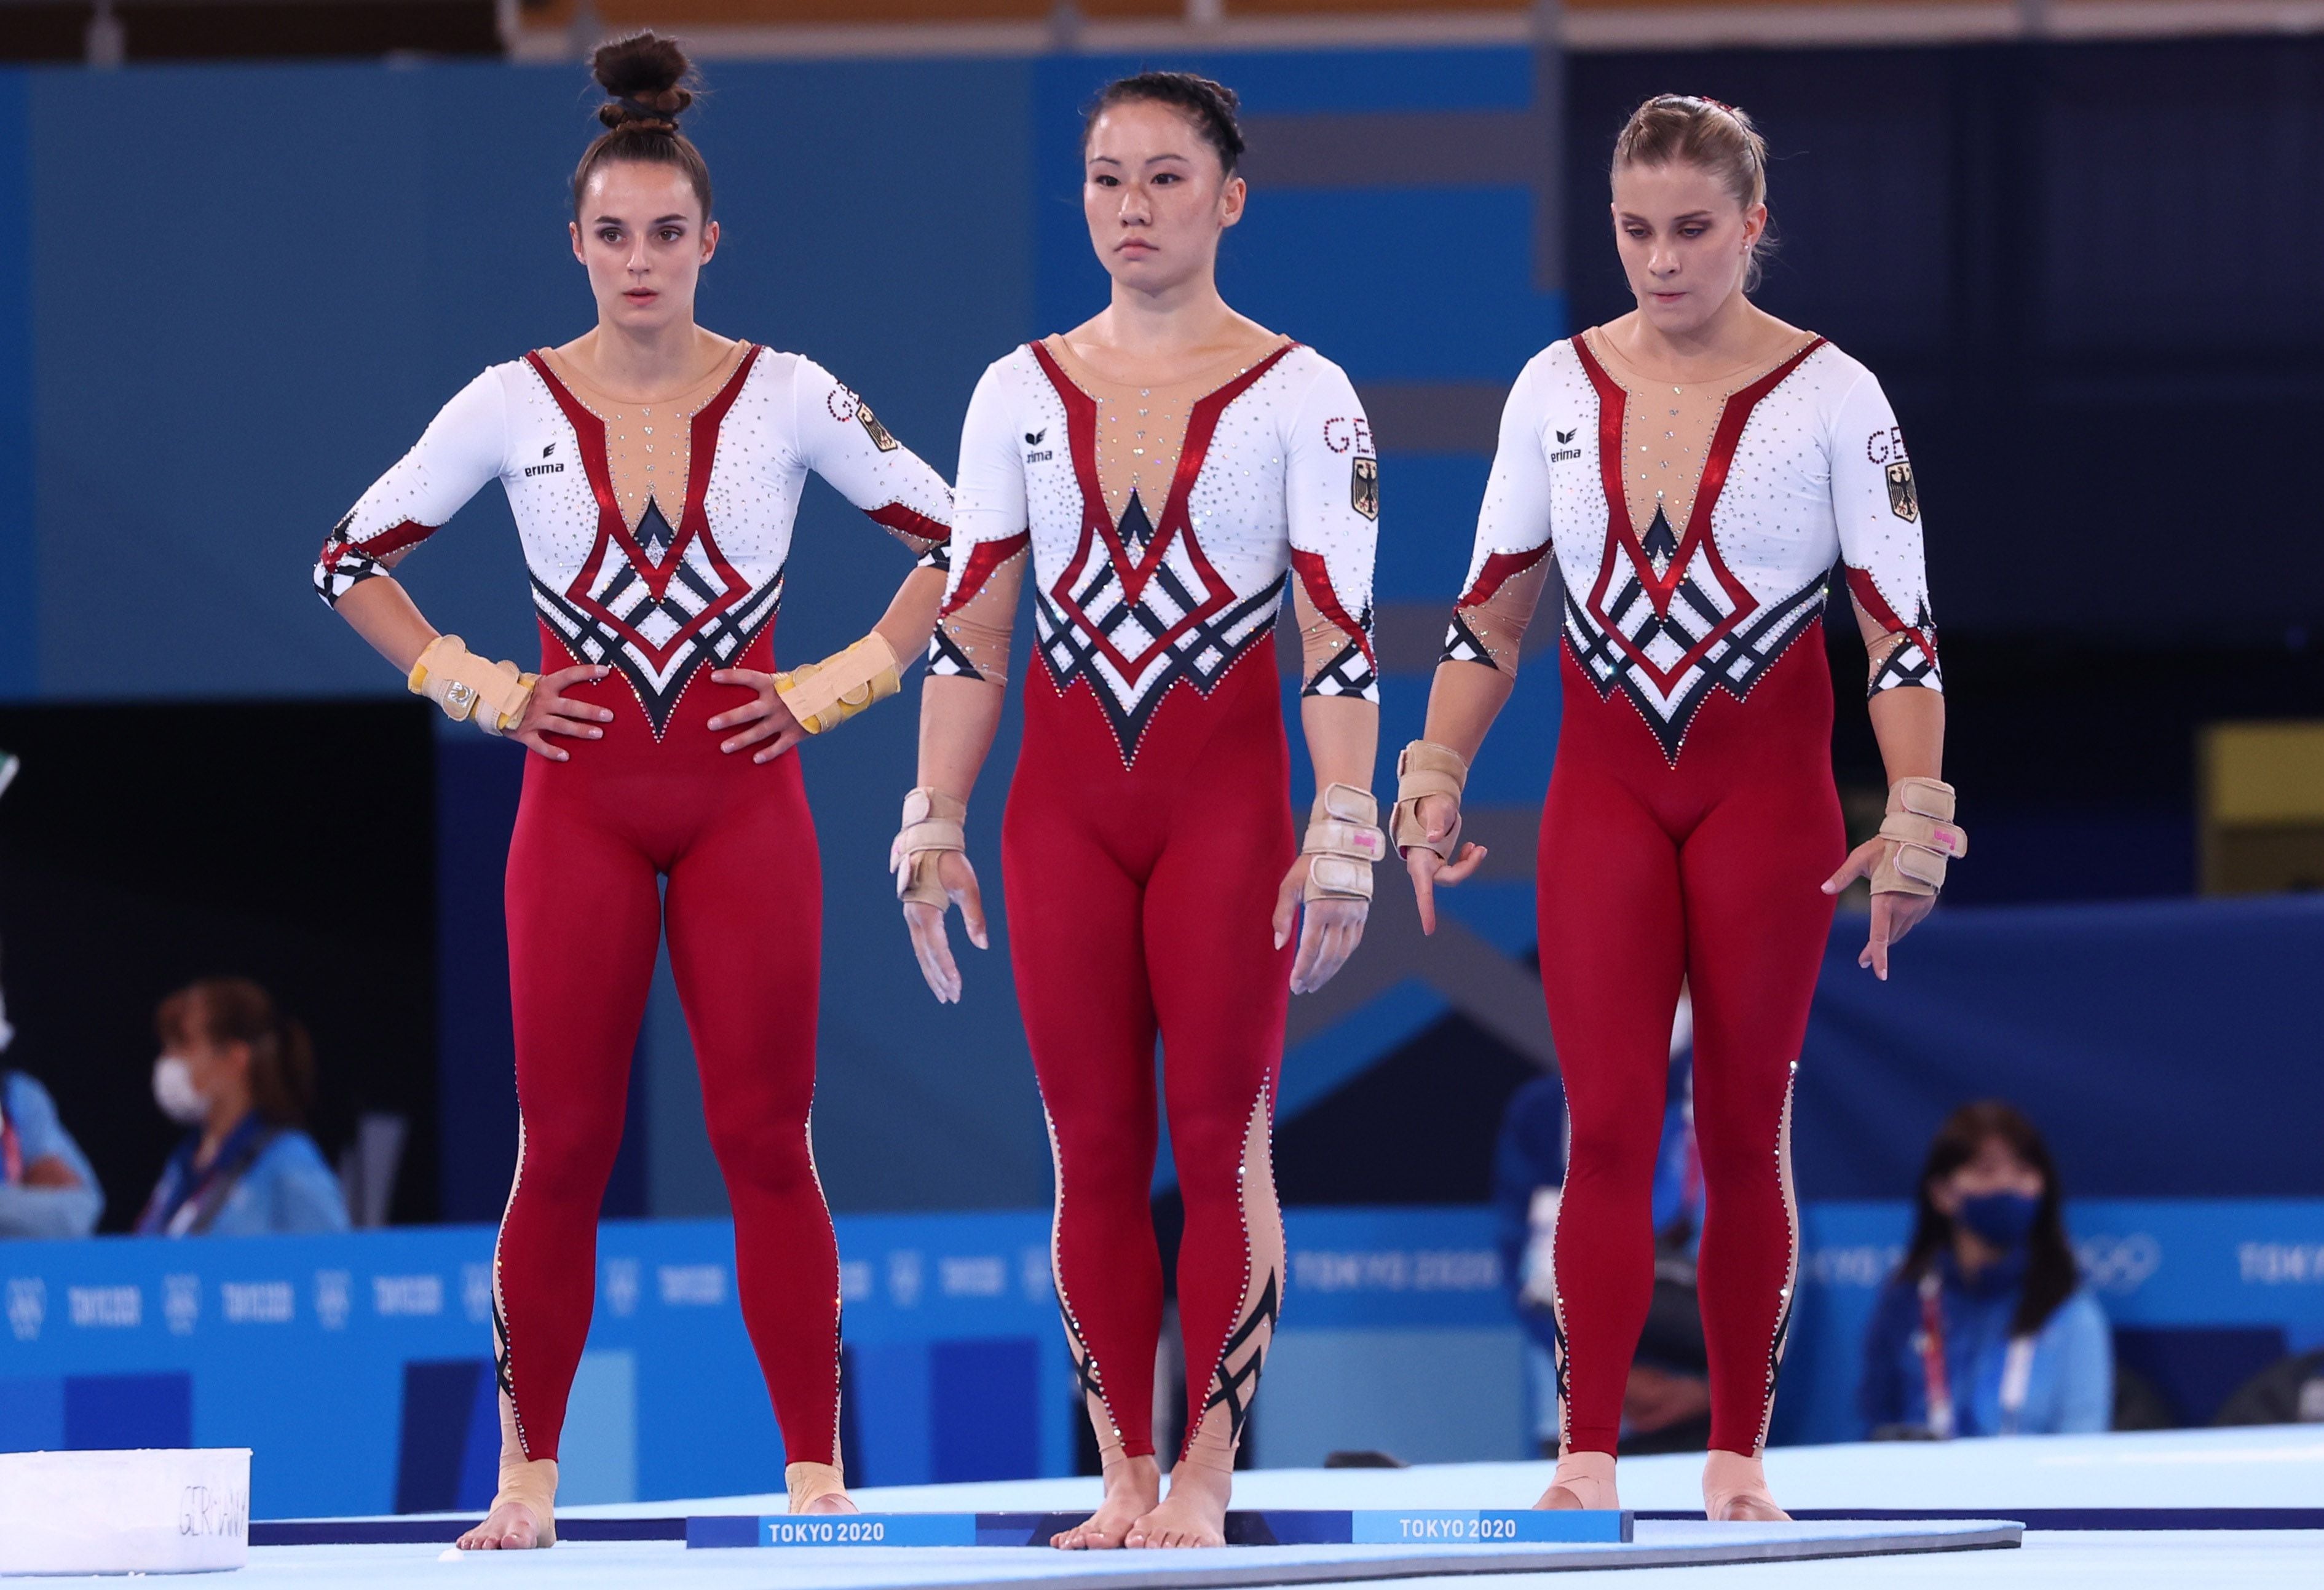 We need to talk about the uniforms of female athletes at the Olympics